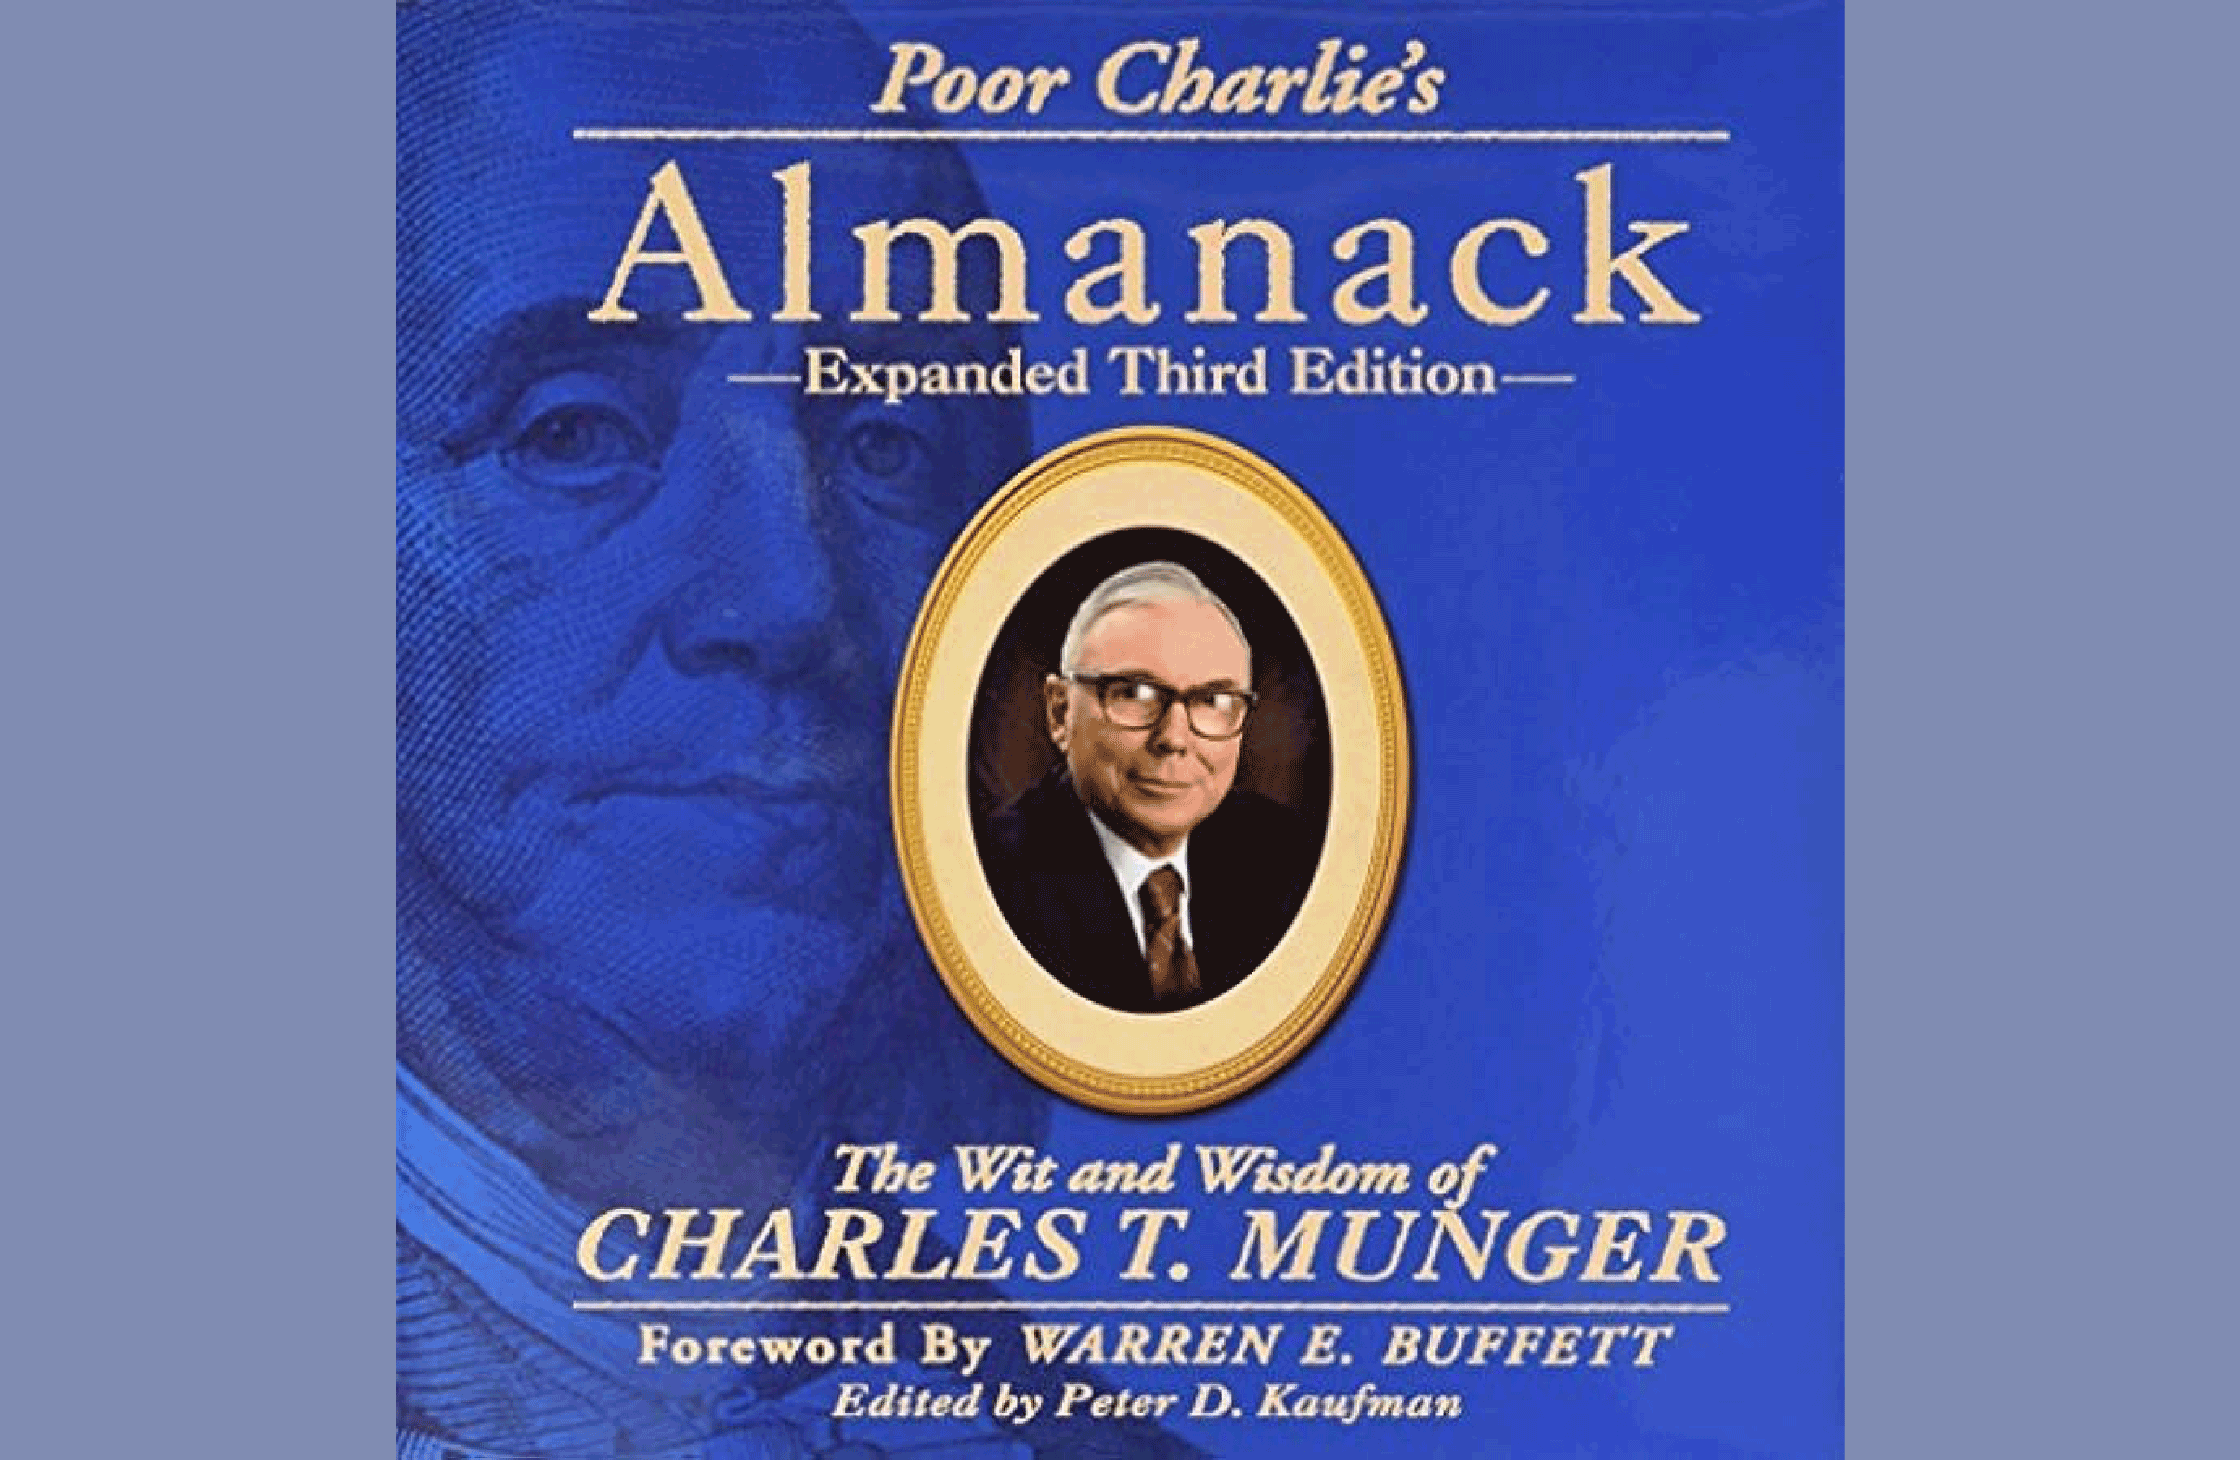 Summary: Poor Charlie's Almanack: The Wit and Wisdom of Charles T. Munger